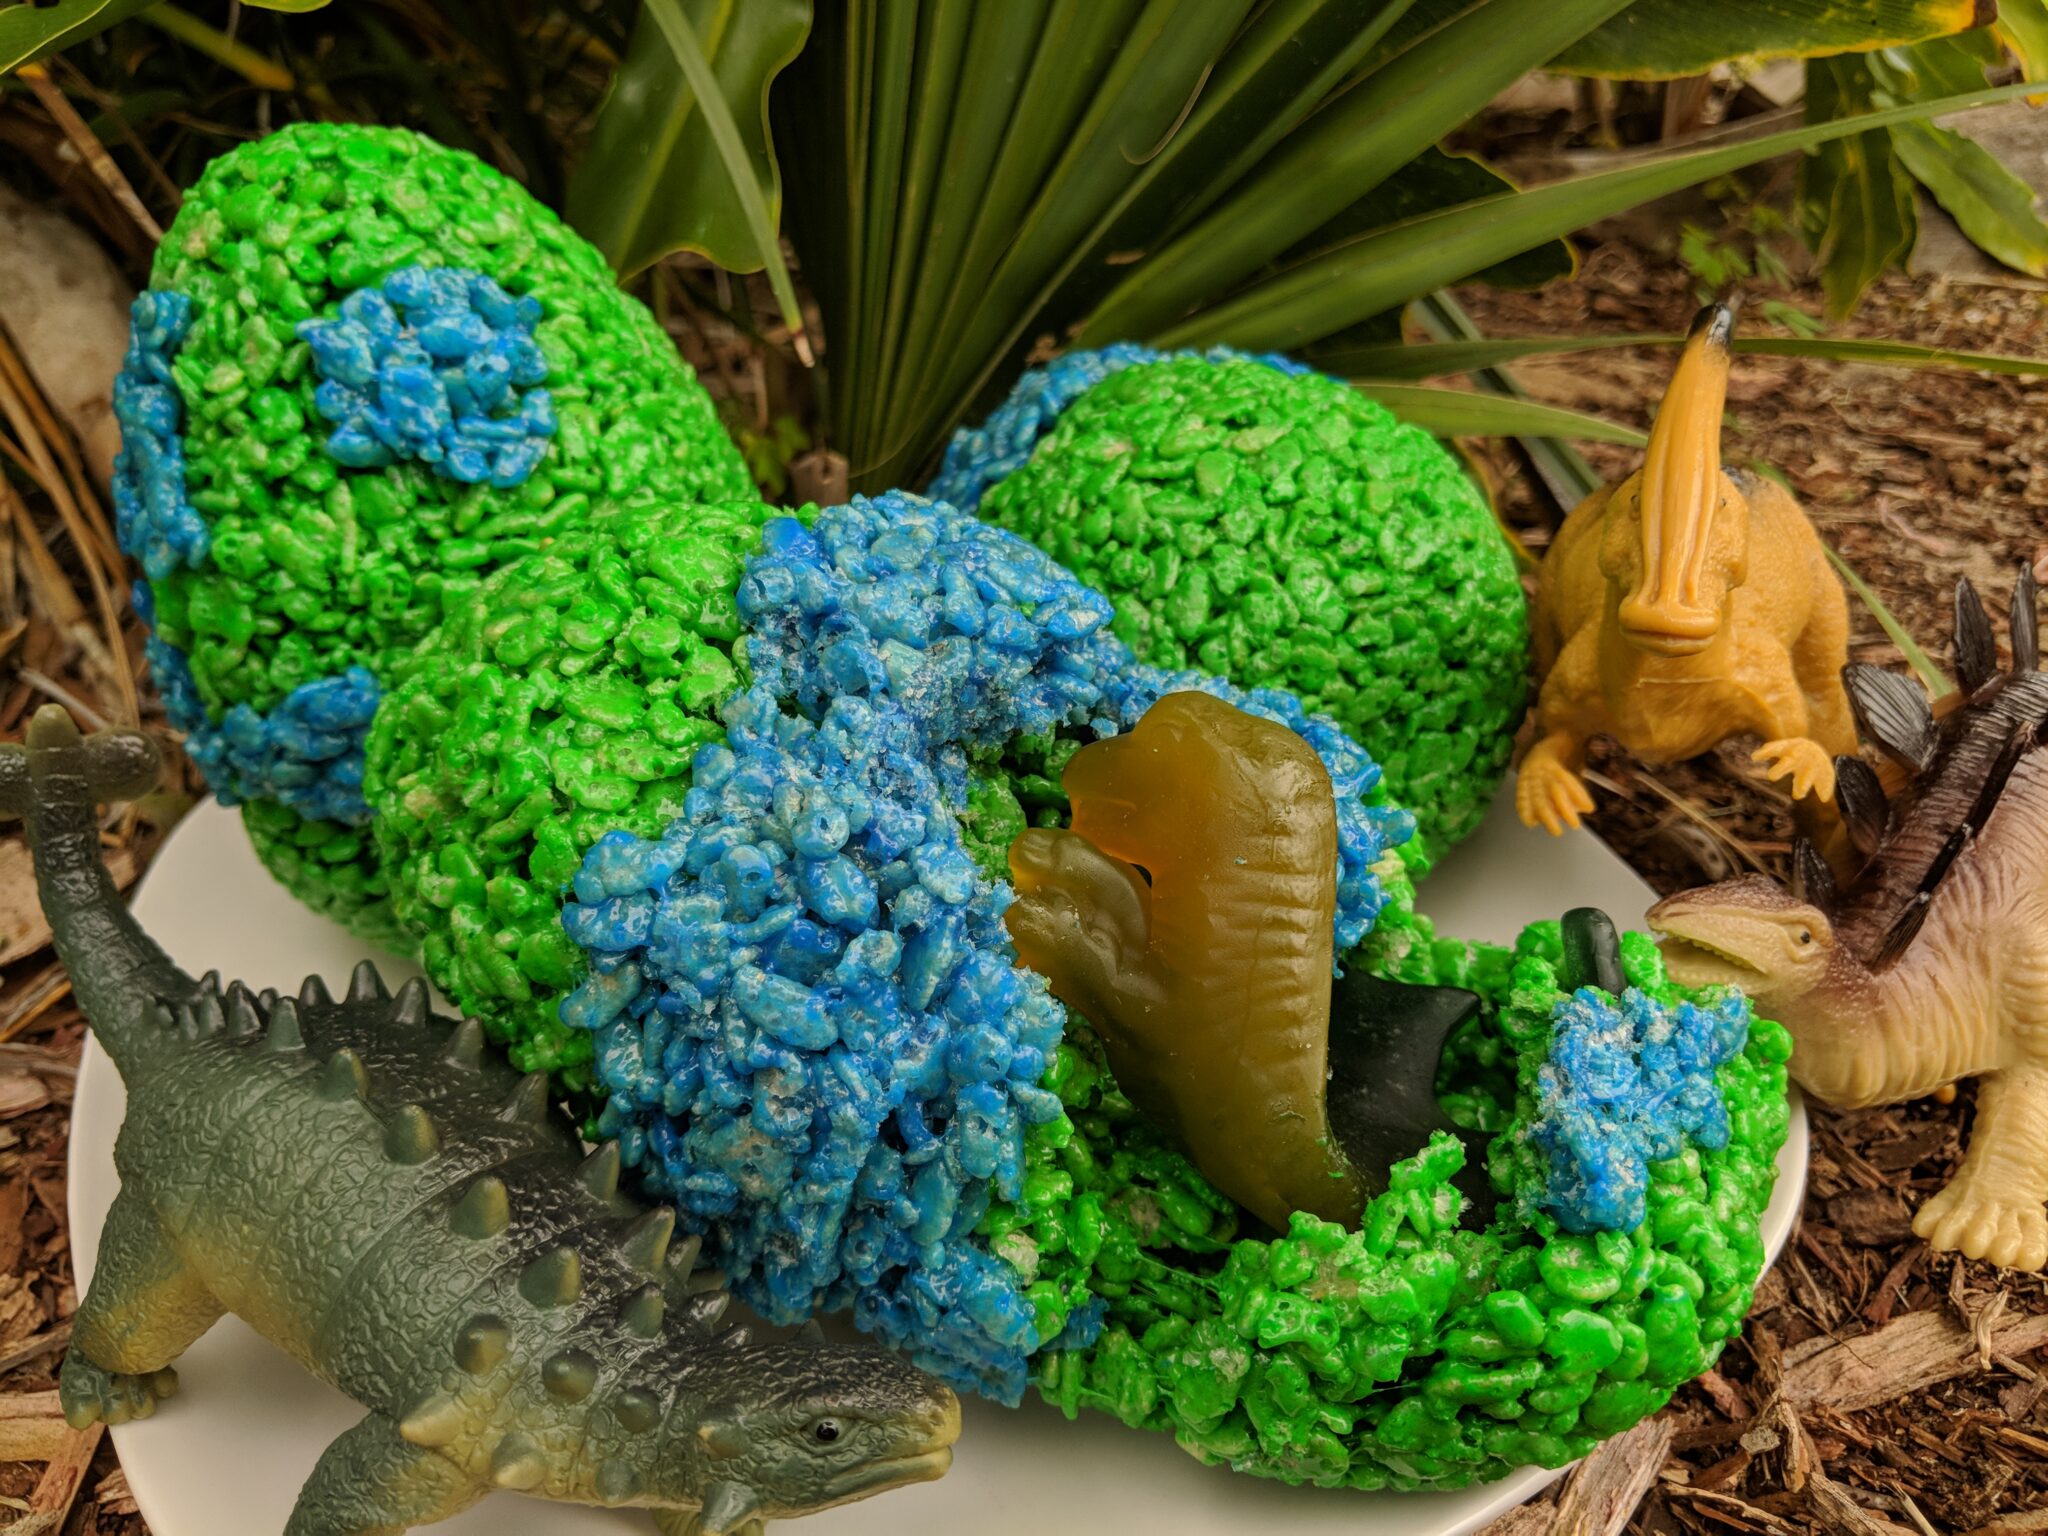 These Jurassic World inspired dinosaur treats are sure to be a hit with kids!